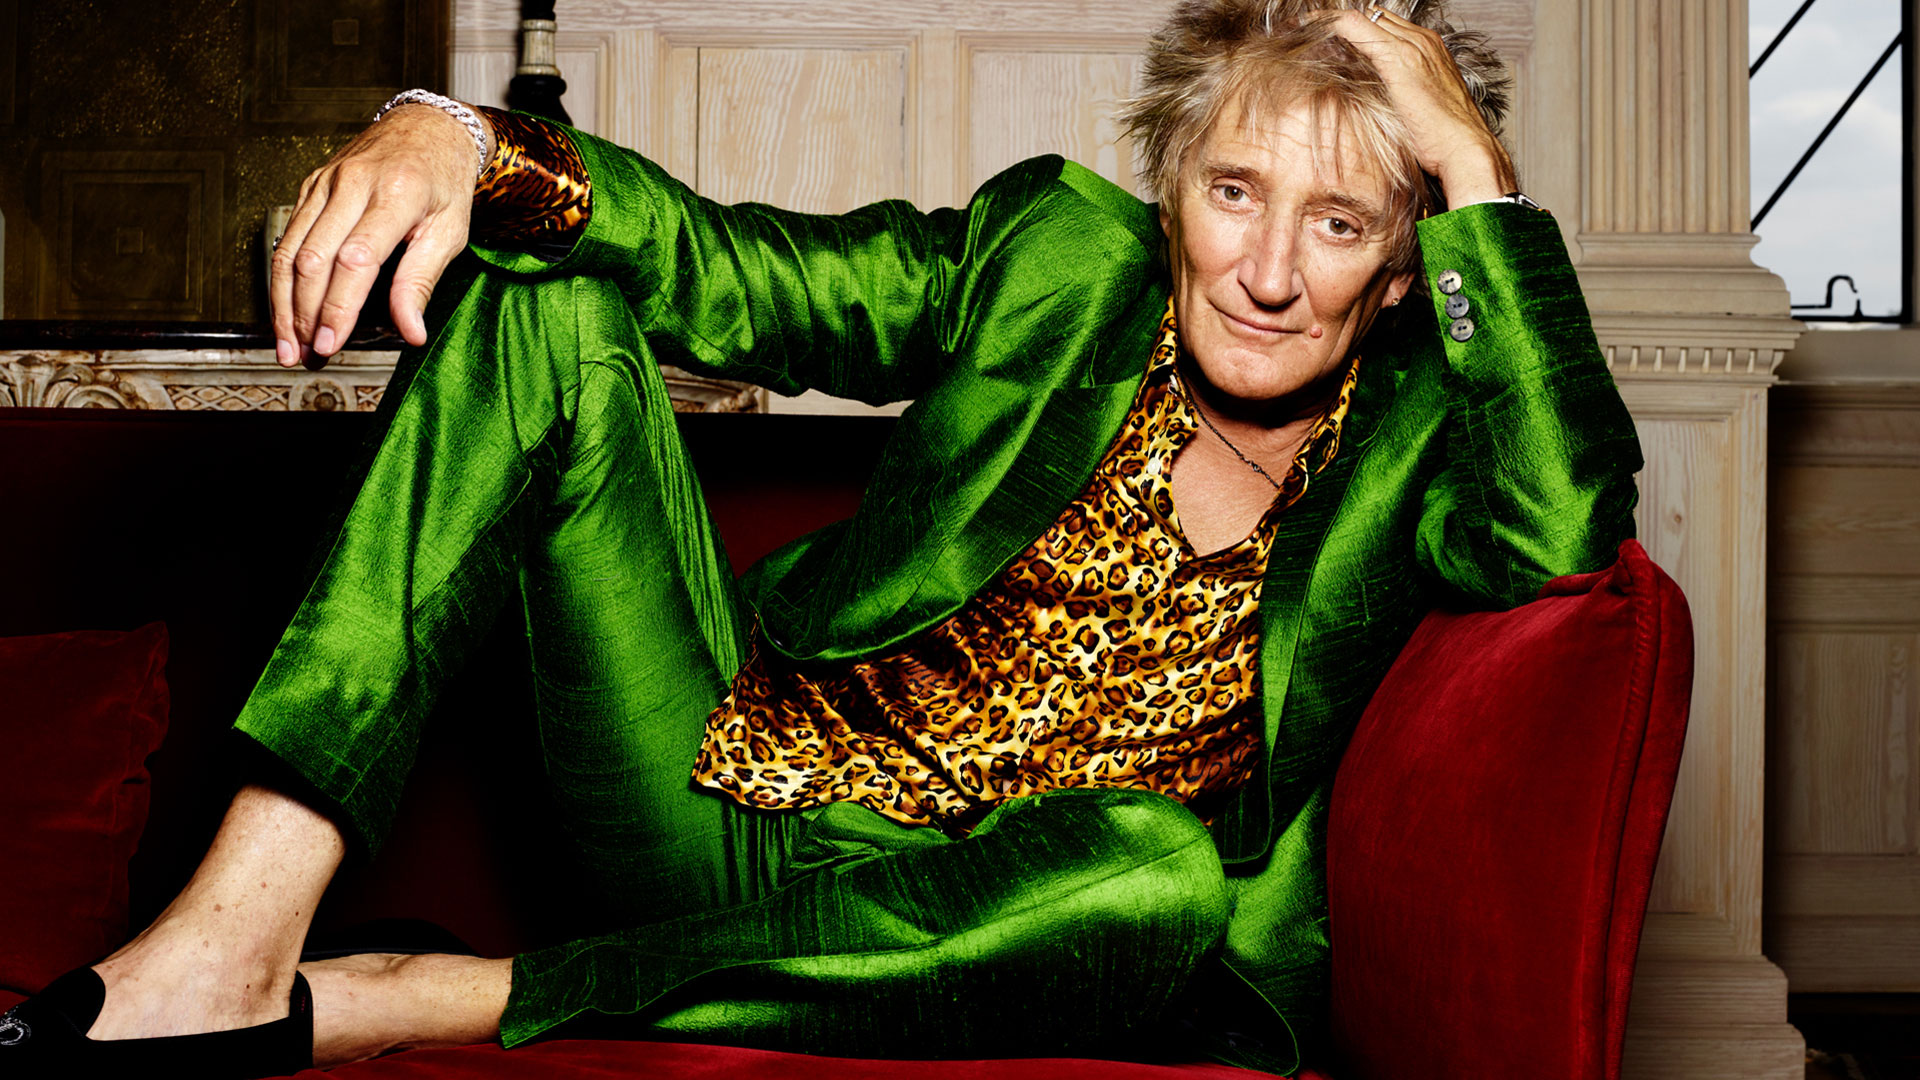 Rod Stewart: The 16-year-old me wouldn't believe I'm still doing this at 73